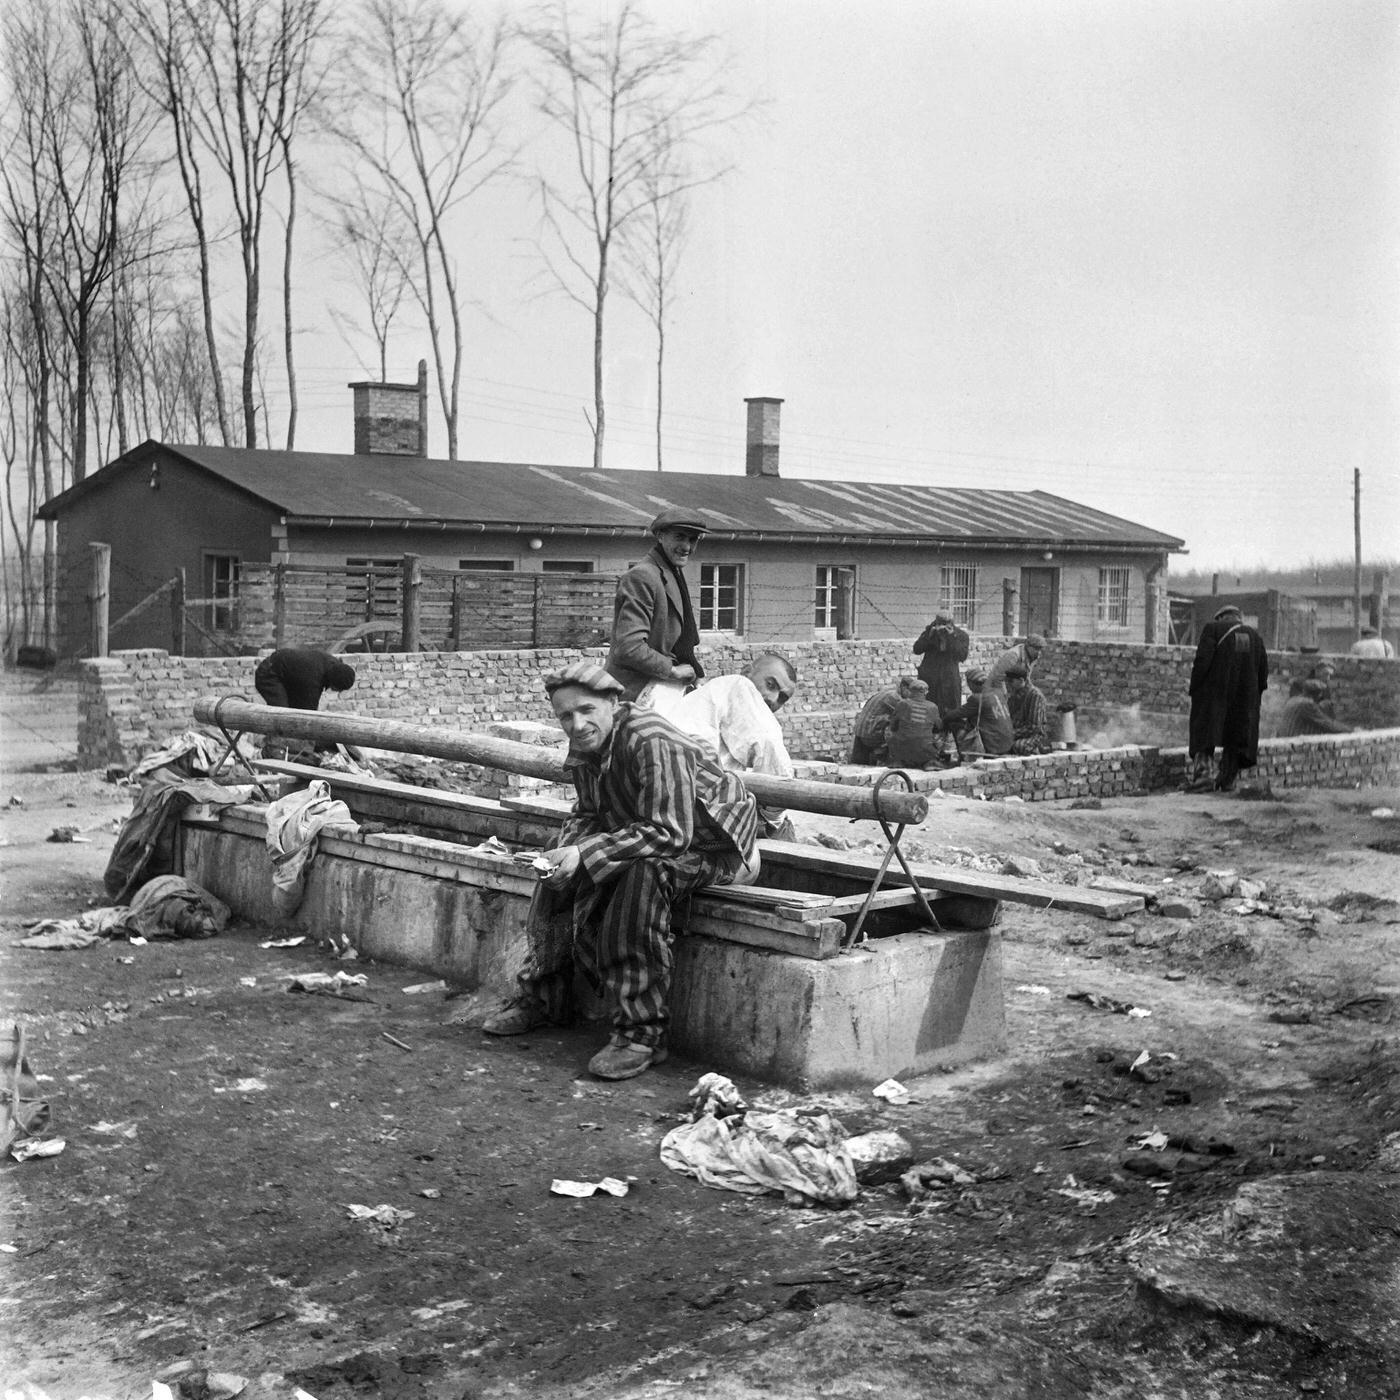 Survivors of Buchenwald concentration camp sitting on a latrine after its liberation by Allied troops in April 1945.